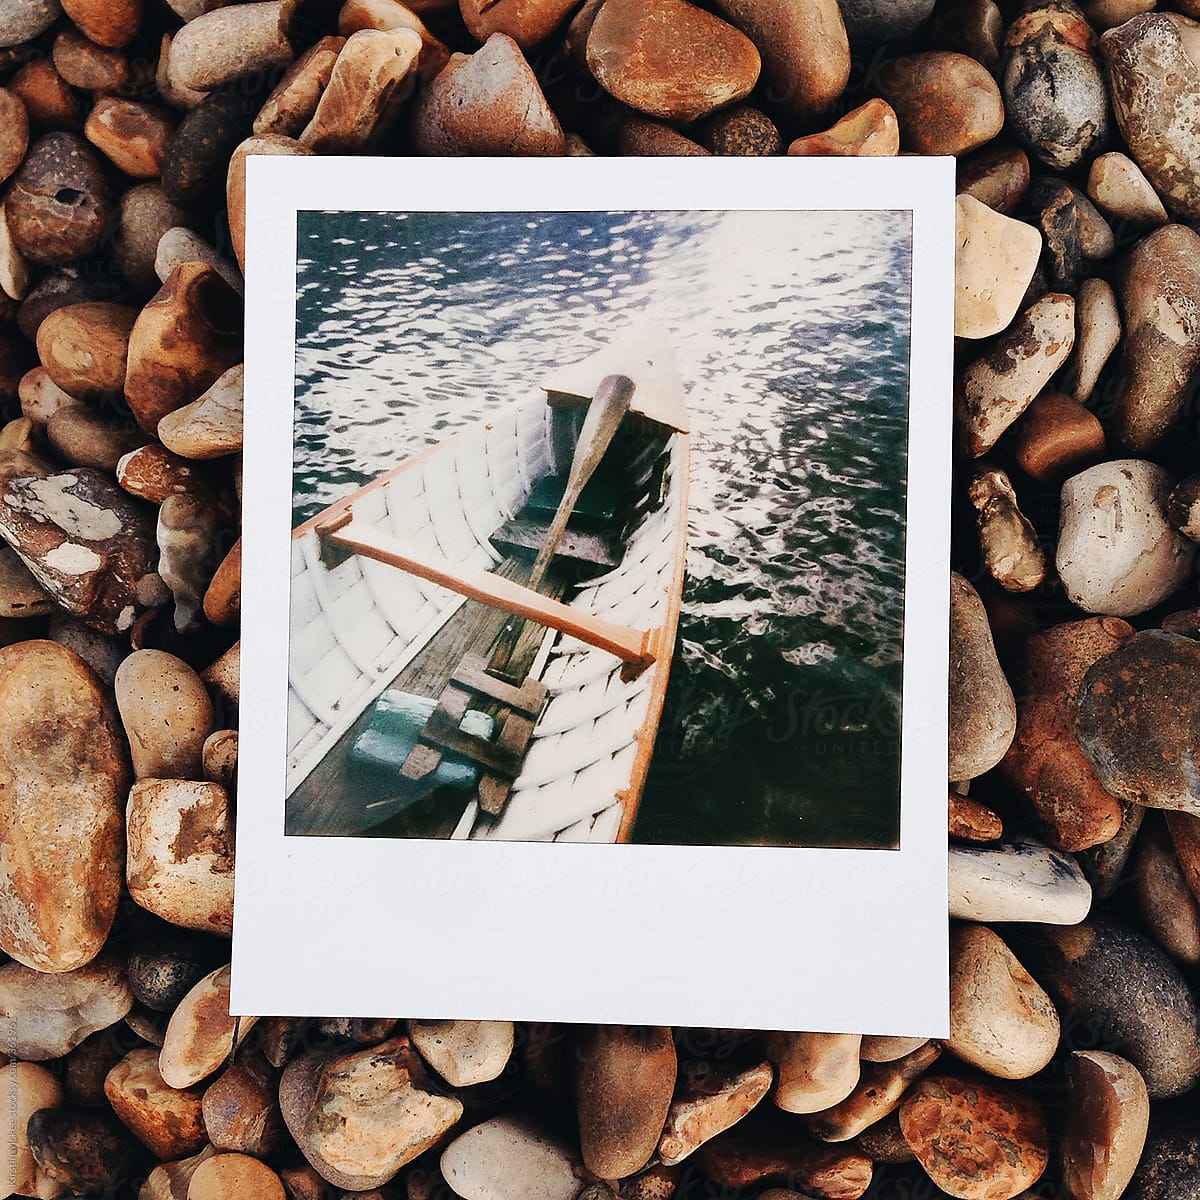 Instant image of a boat in the water, taken on a beach.